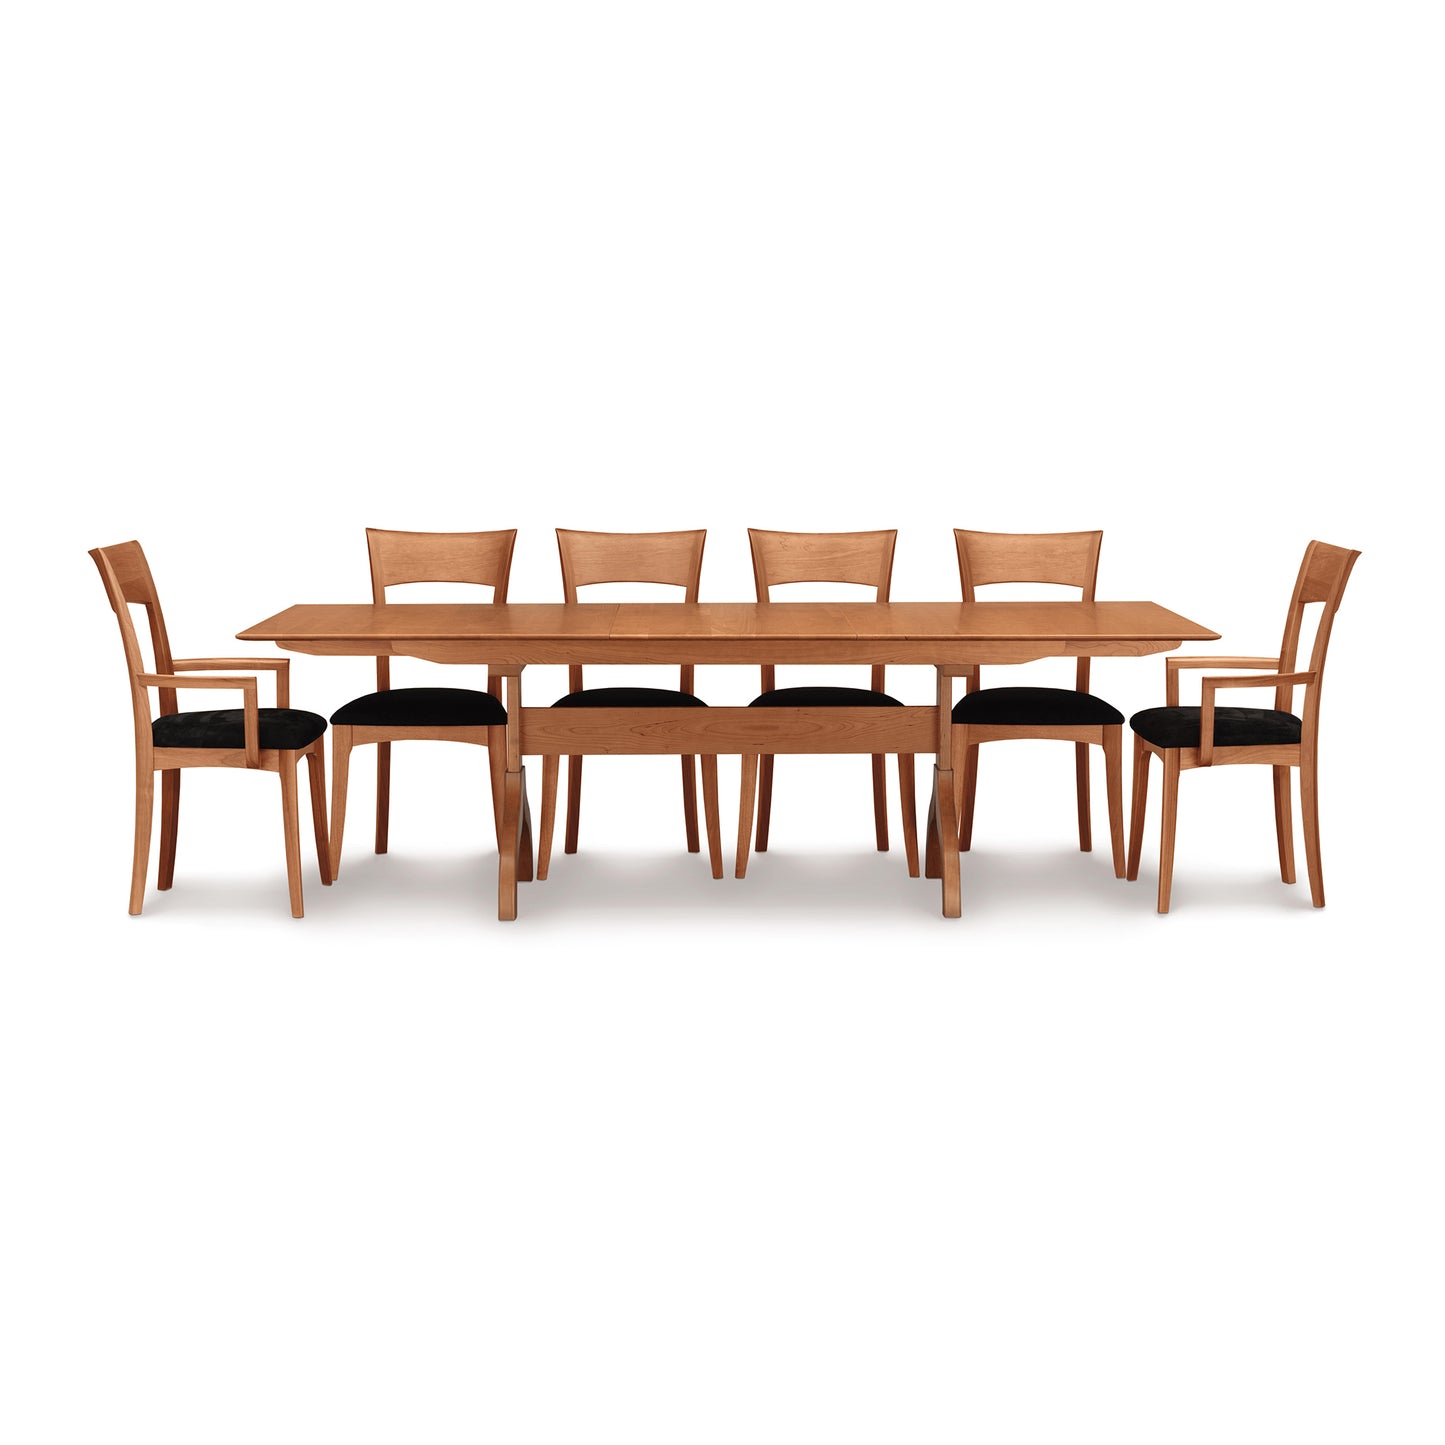 A wooden Sarah Shaker Trestle Extension dining table set with eight matching chairs from Copeland Furniture, presented against a white background.